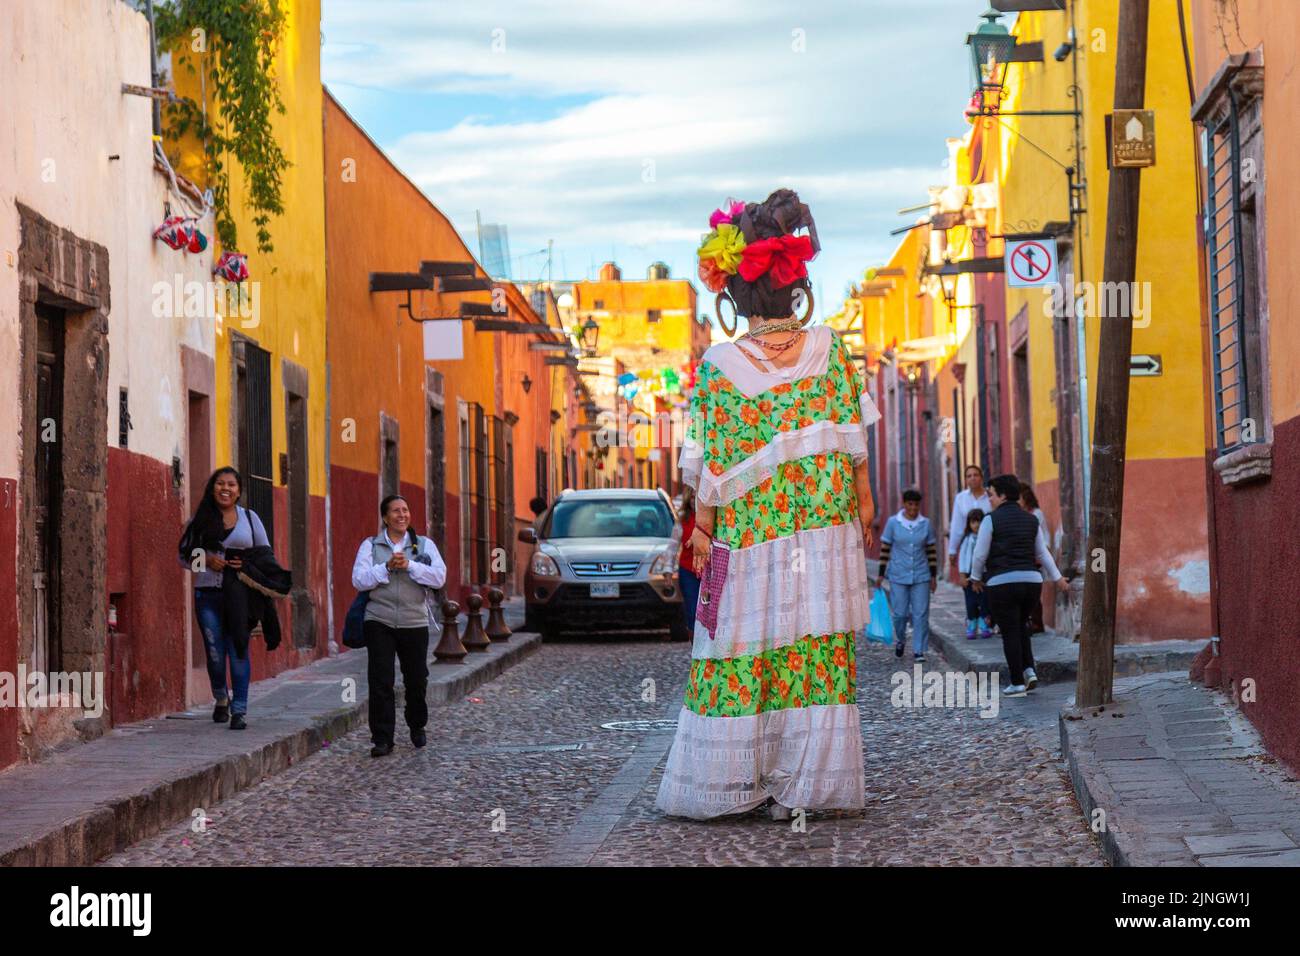 People react to seeing a mojiganga, or giant puppet made from papier mâché as it walks through the historic city center of San Miguel de Allende, Mexico. Stock Photo